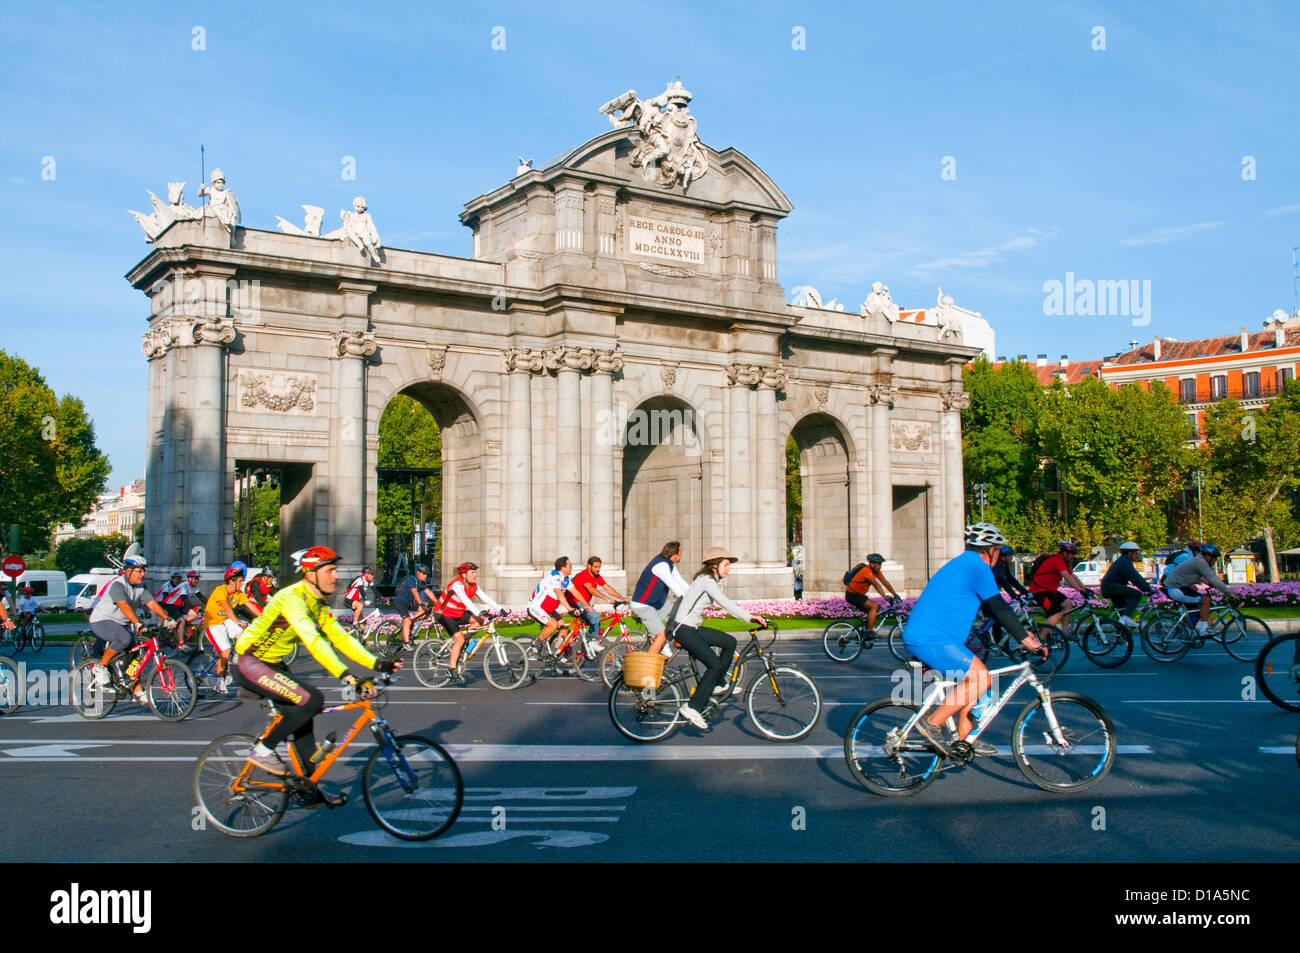 People riding bike in the Bike Party. Alcala Gate, Madrid, Spain. Stock Photo